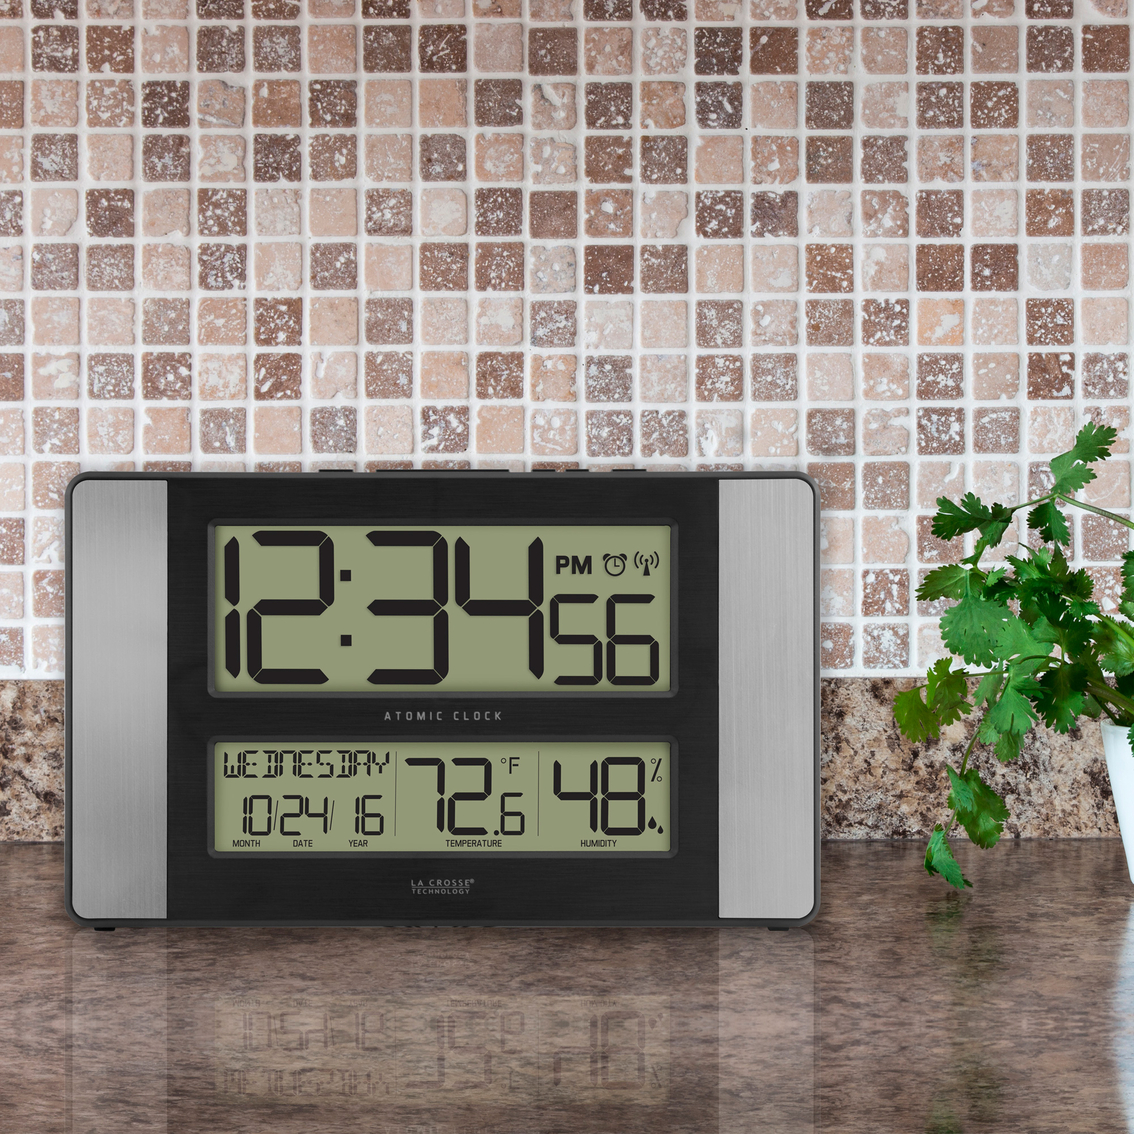 La Crosse Digital Wall Clock with Indoor Temperature and Humidity - Image 2 of 2